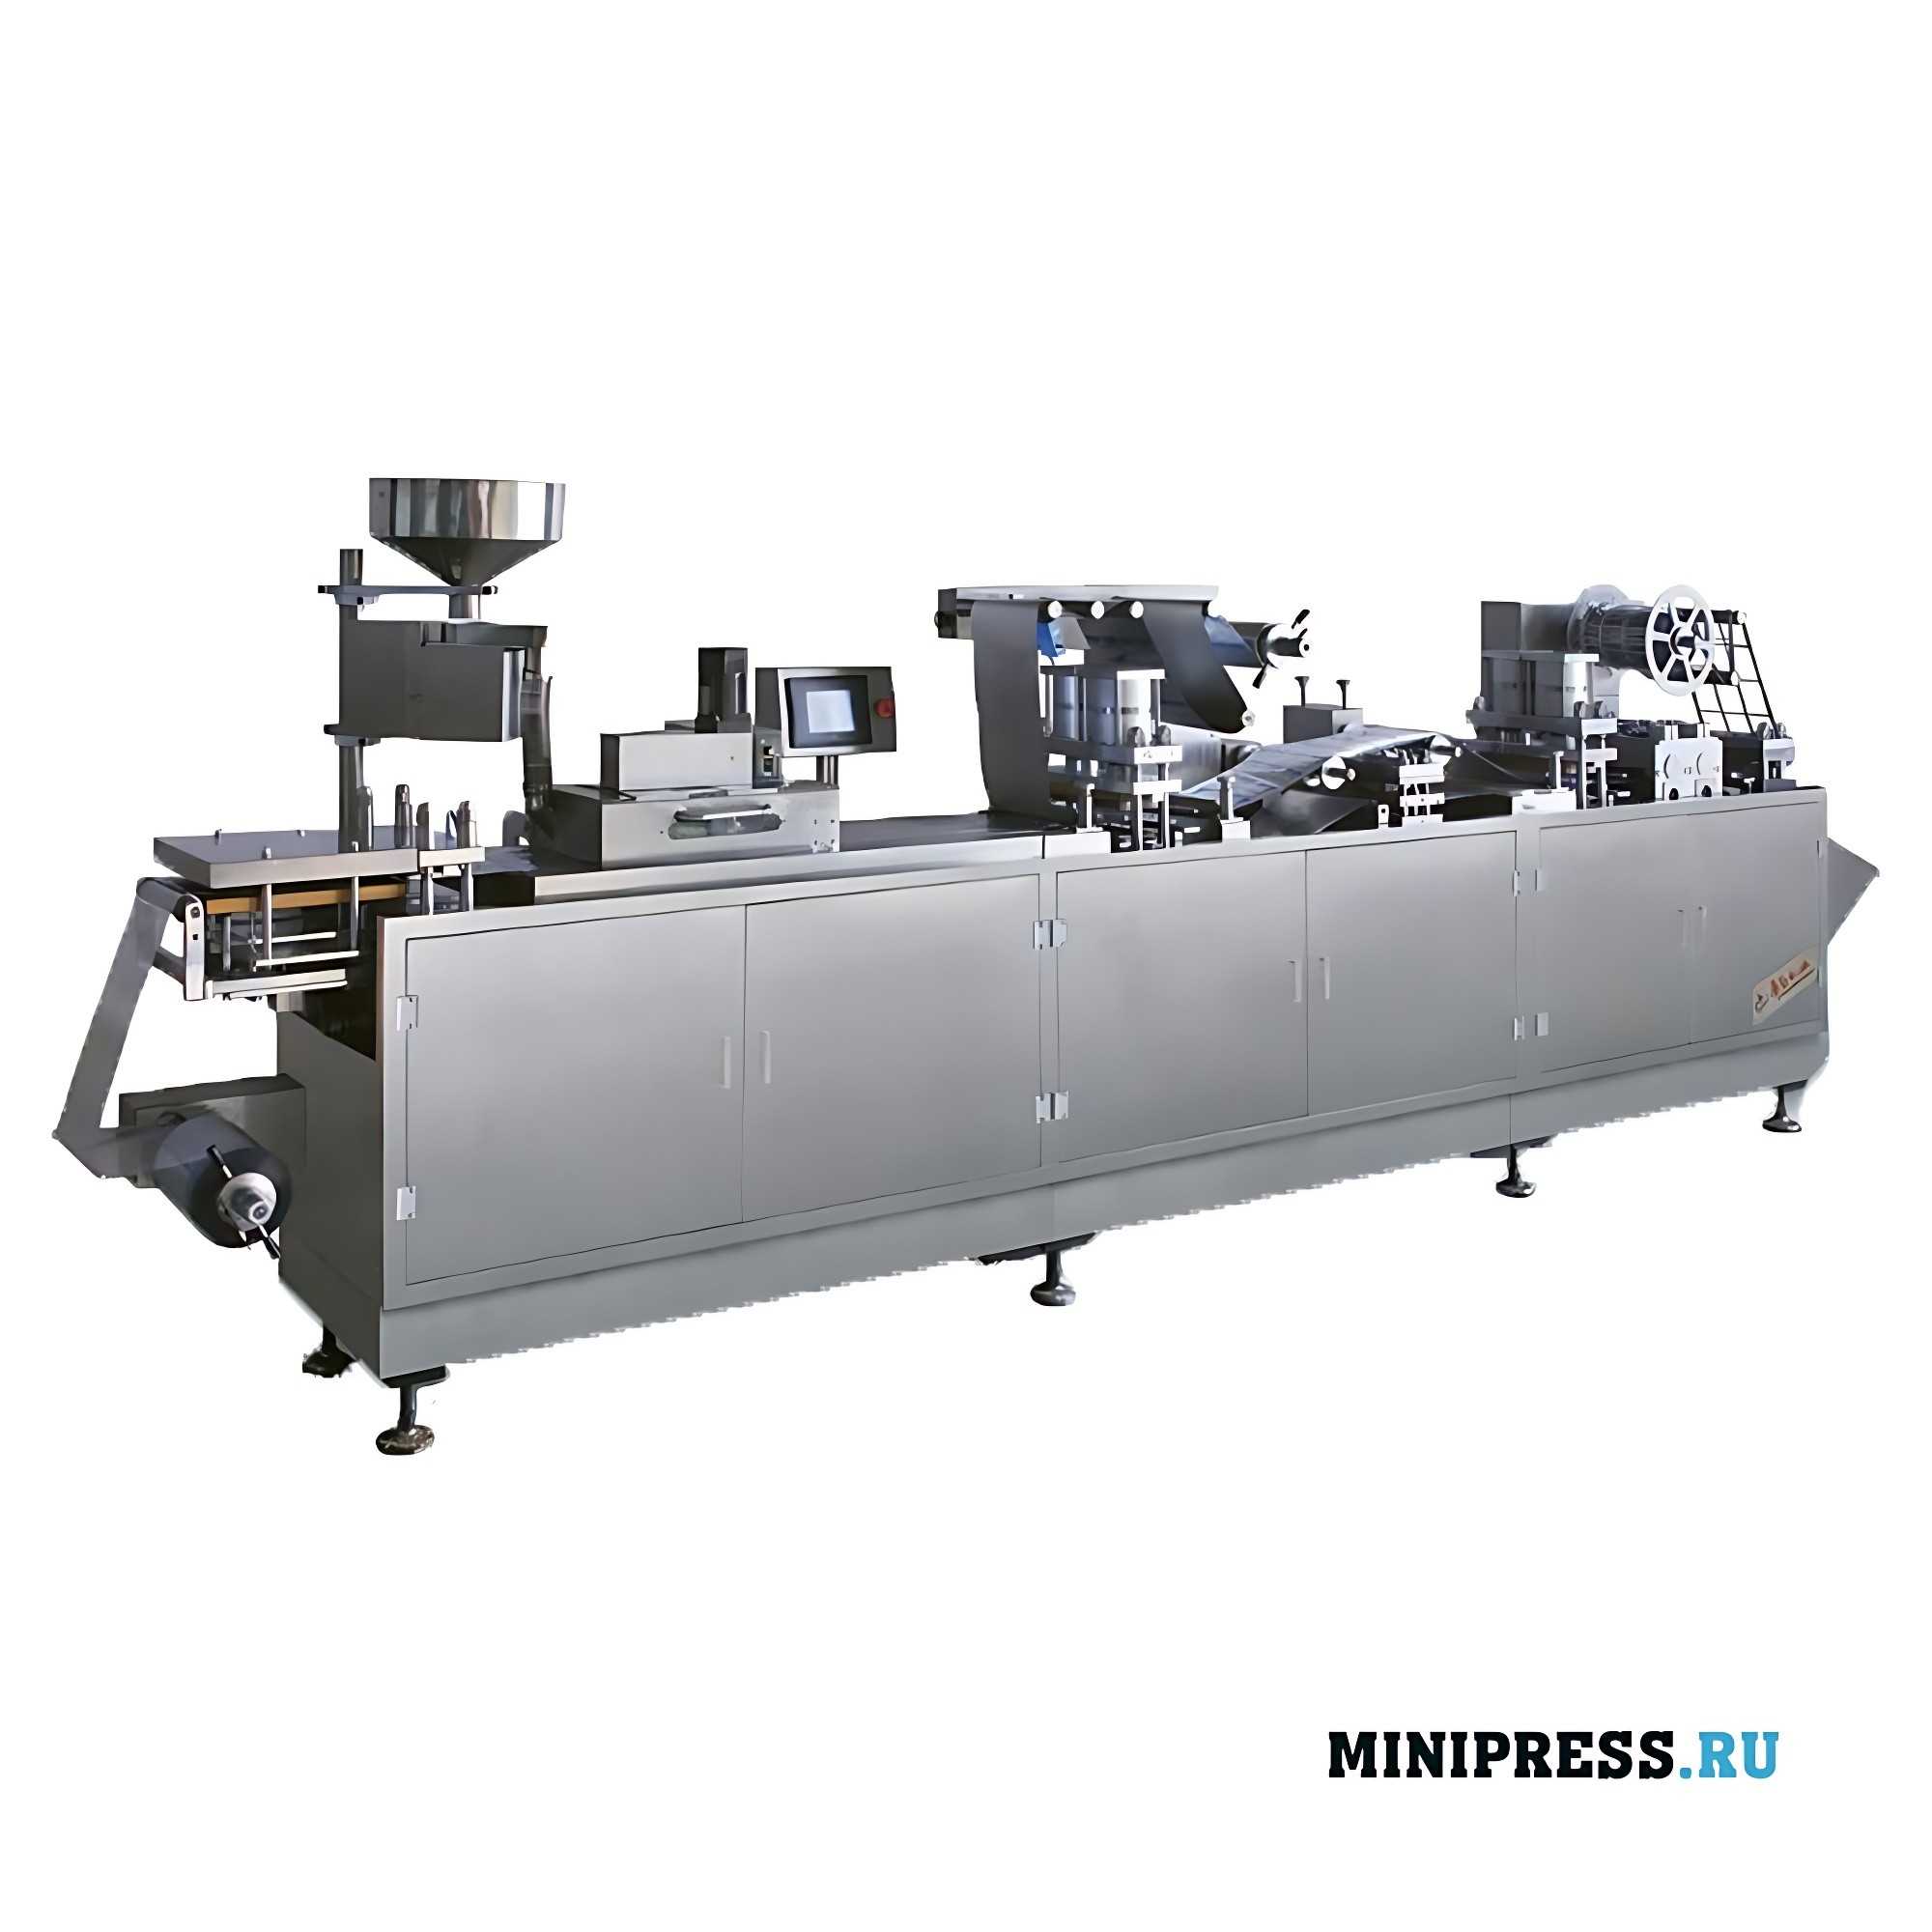 Automatic Packaging Equipment for tight sealing Aluminum/Plastic HMR 16